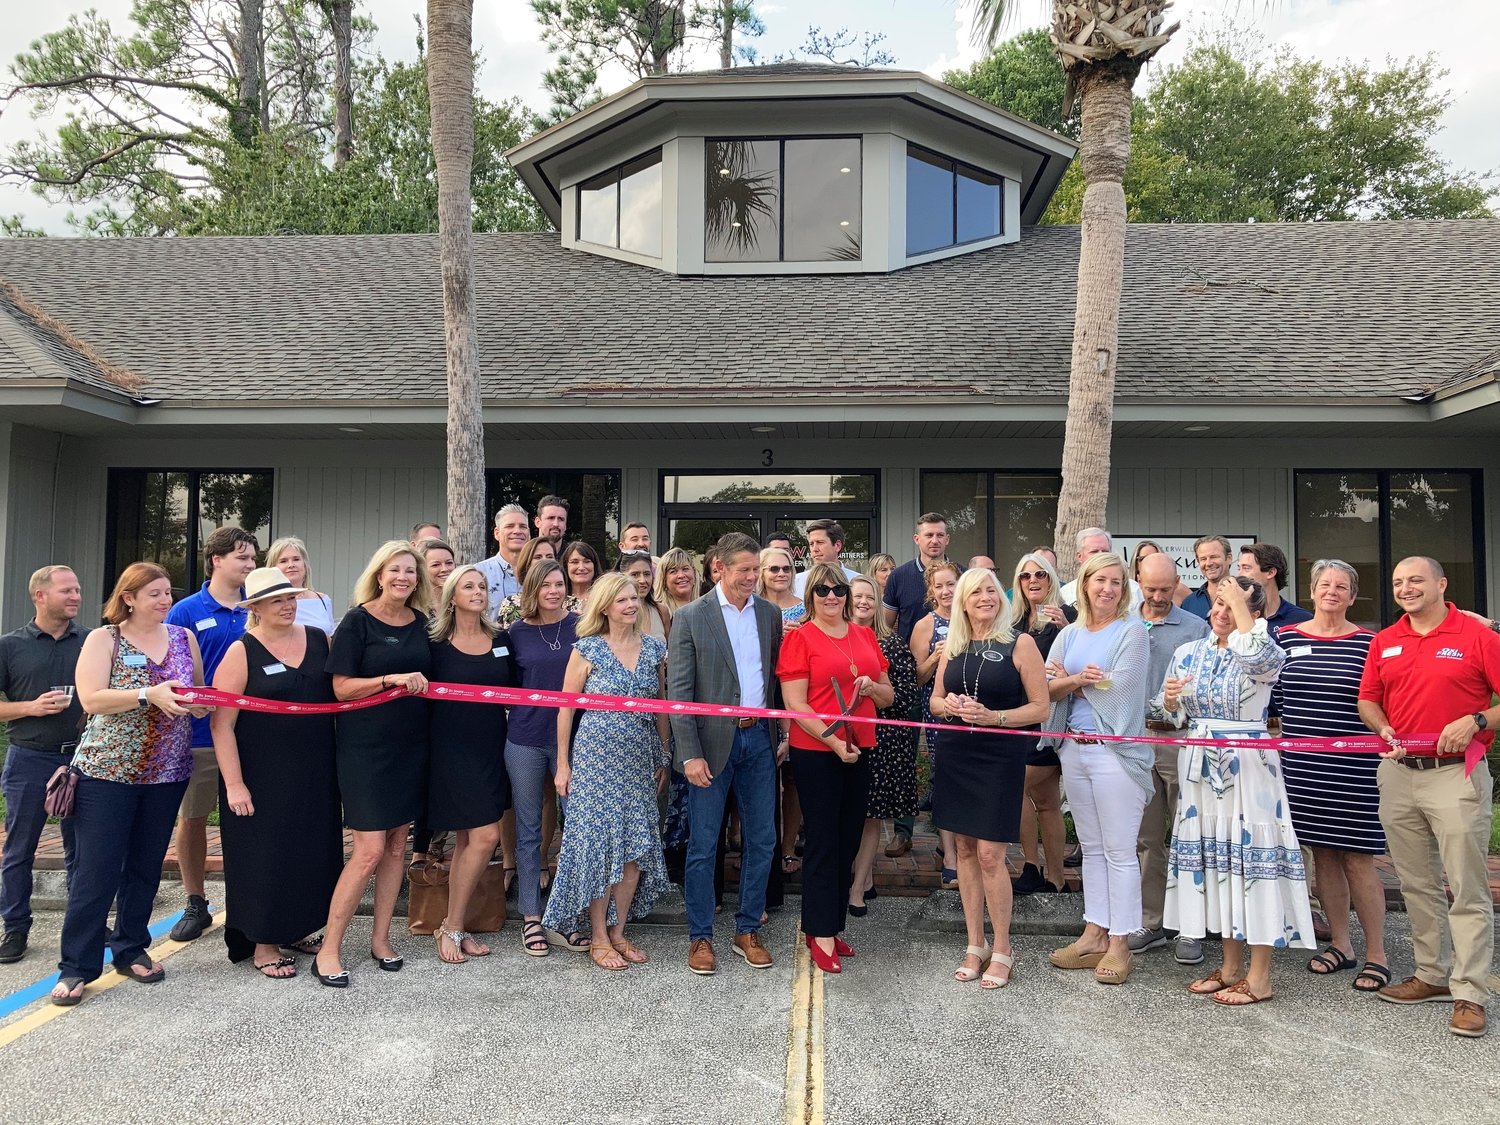 Margaret Sherrill, operating principal, cuts the ribbon for Keller Williams Realty Atlantic Partners’ new office in Sawgrass Village as team leader Mark Dilworth looks on. St. Johns County Chamber of Commerce Ponte Vedra Beach Division conducted the ceremony.